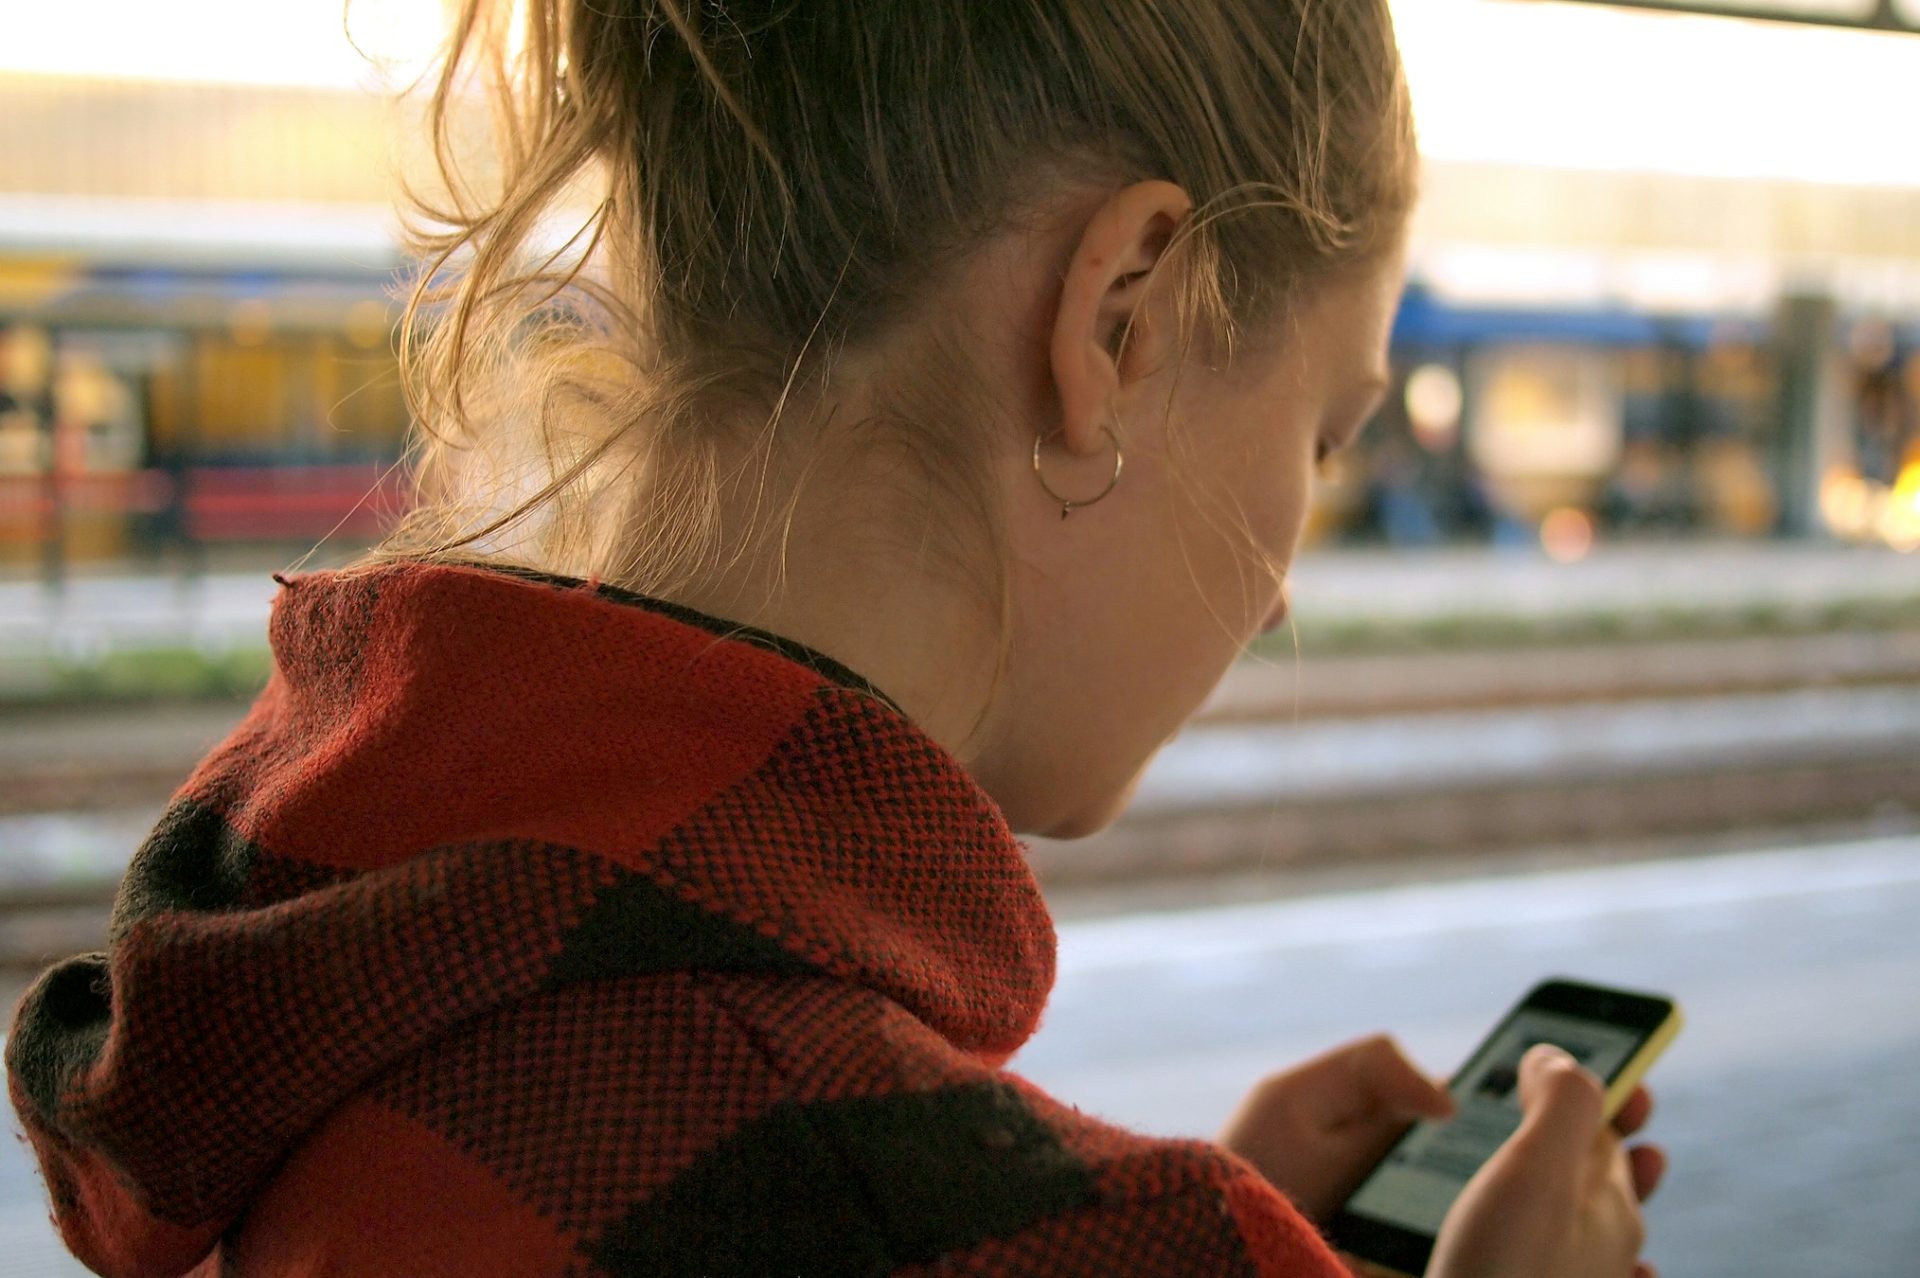 A woman at a train station looking down at her phone